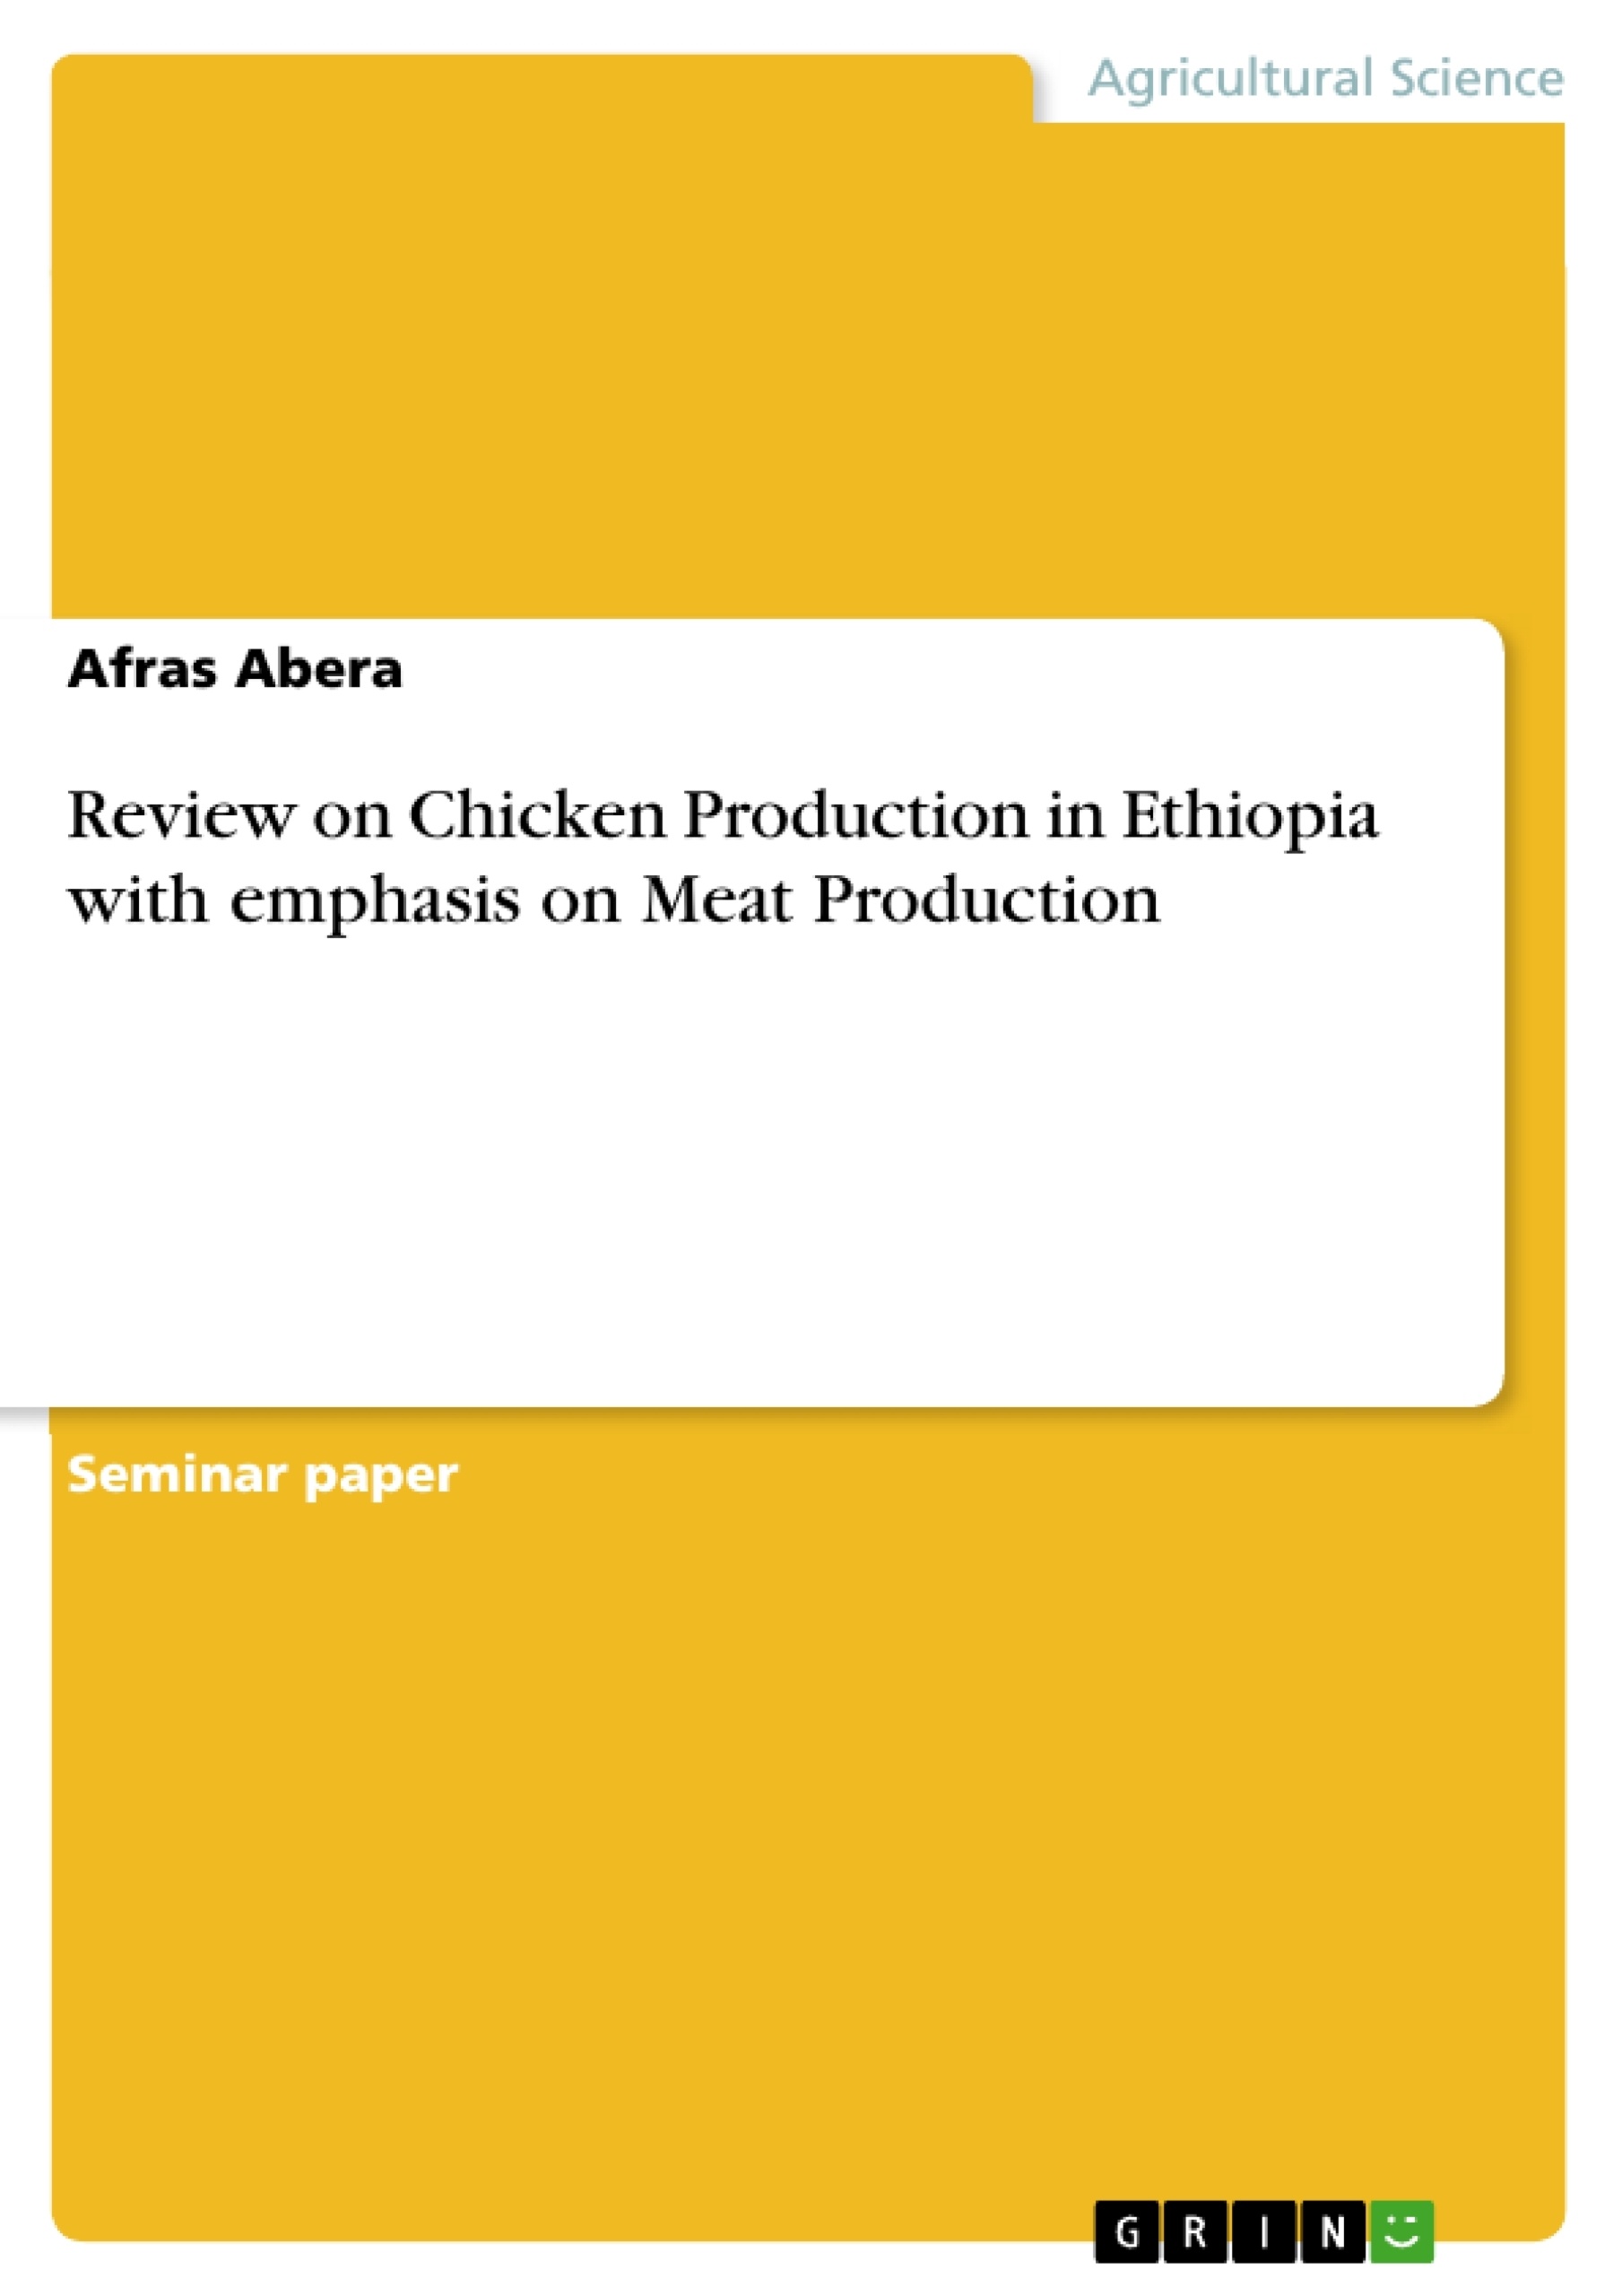 Titre: Review on Chicken Production in Ethiopia with emphasis on Meat Production